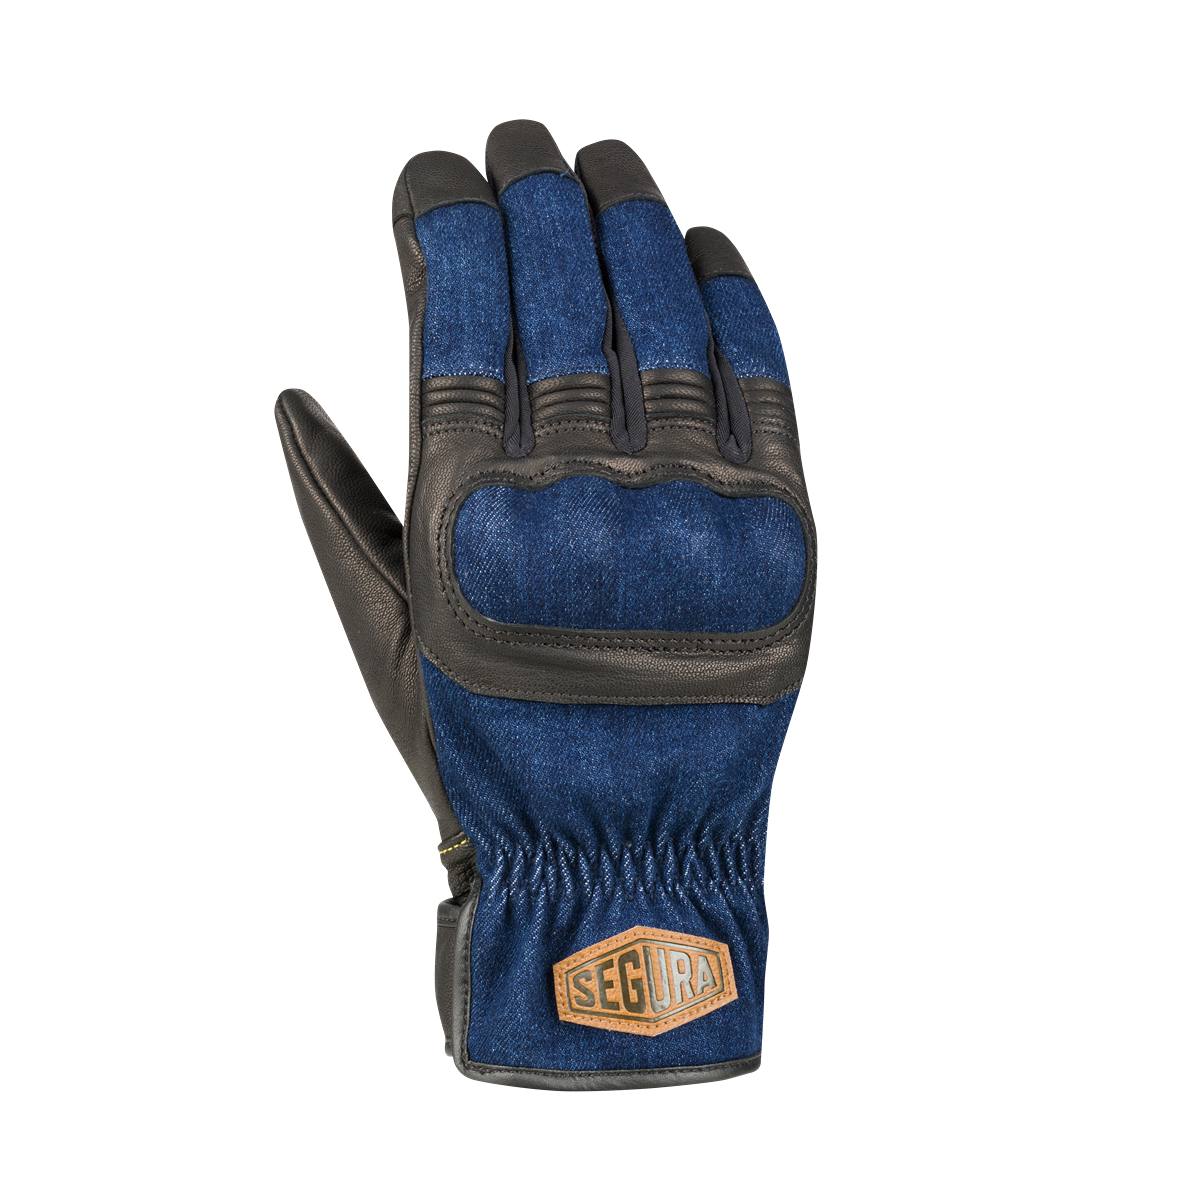 Image of Segura Hunky Gloves Black Blue Taille T11